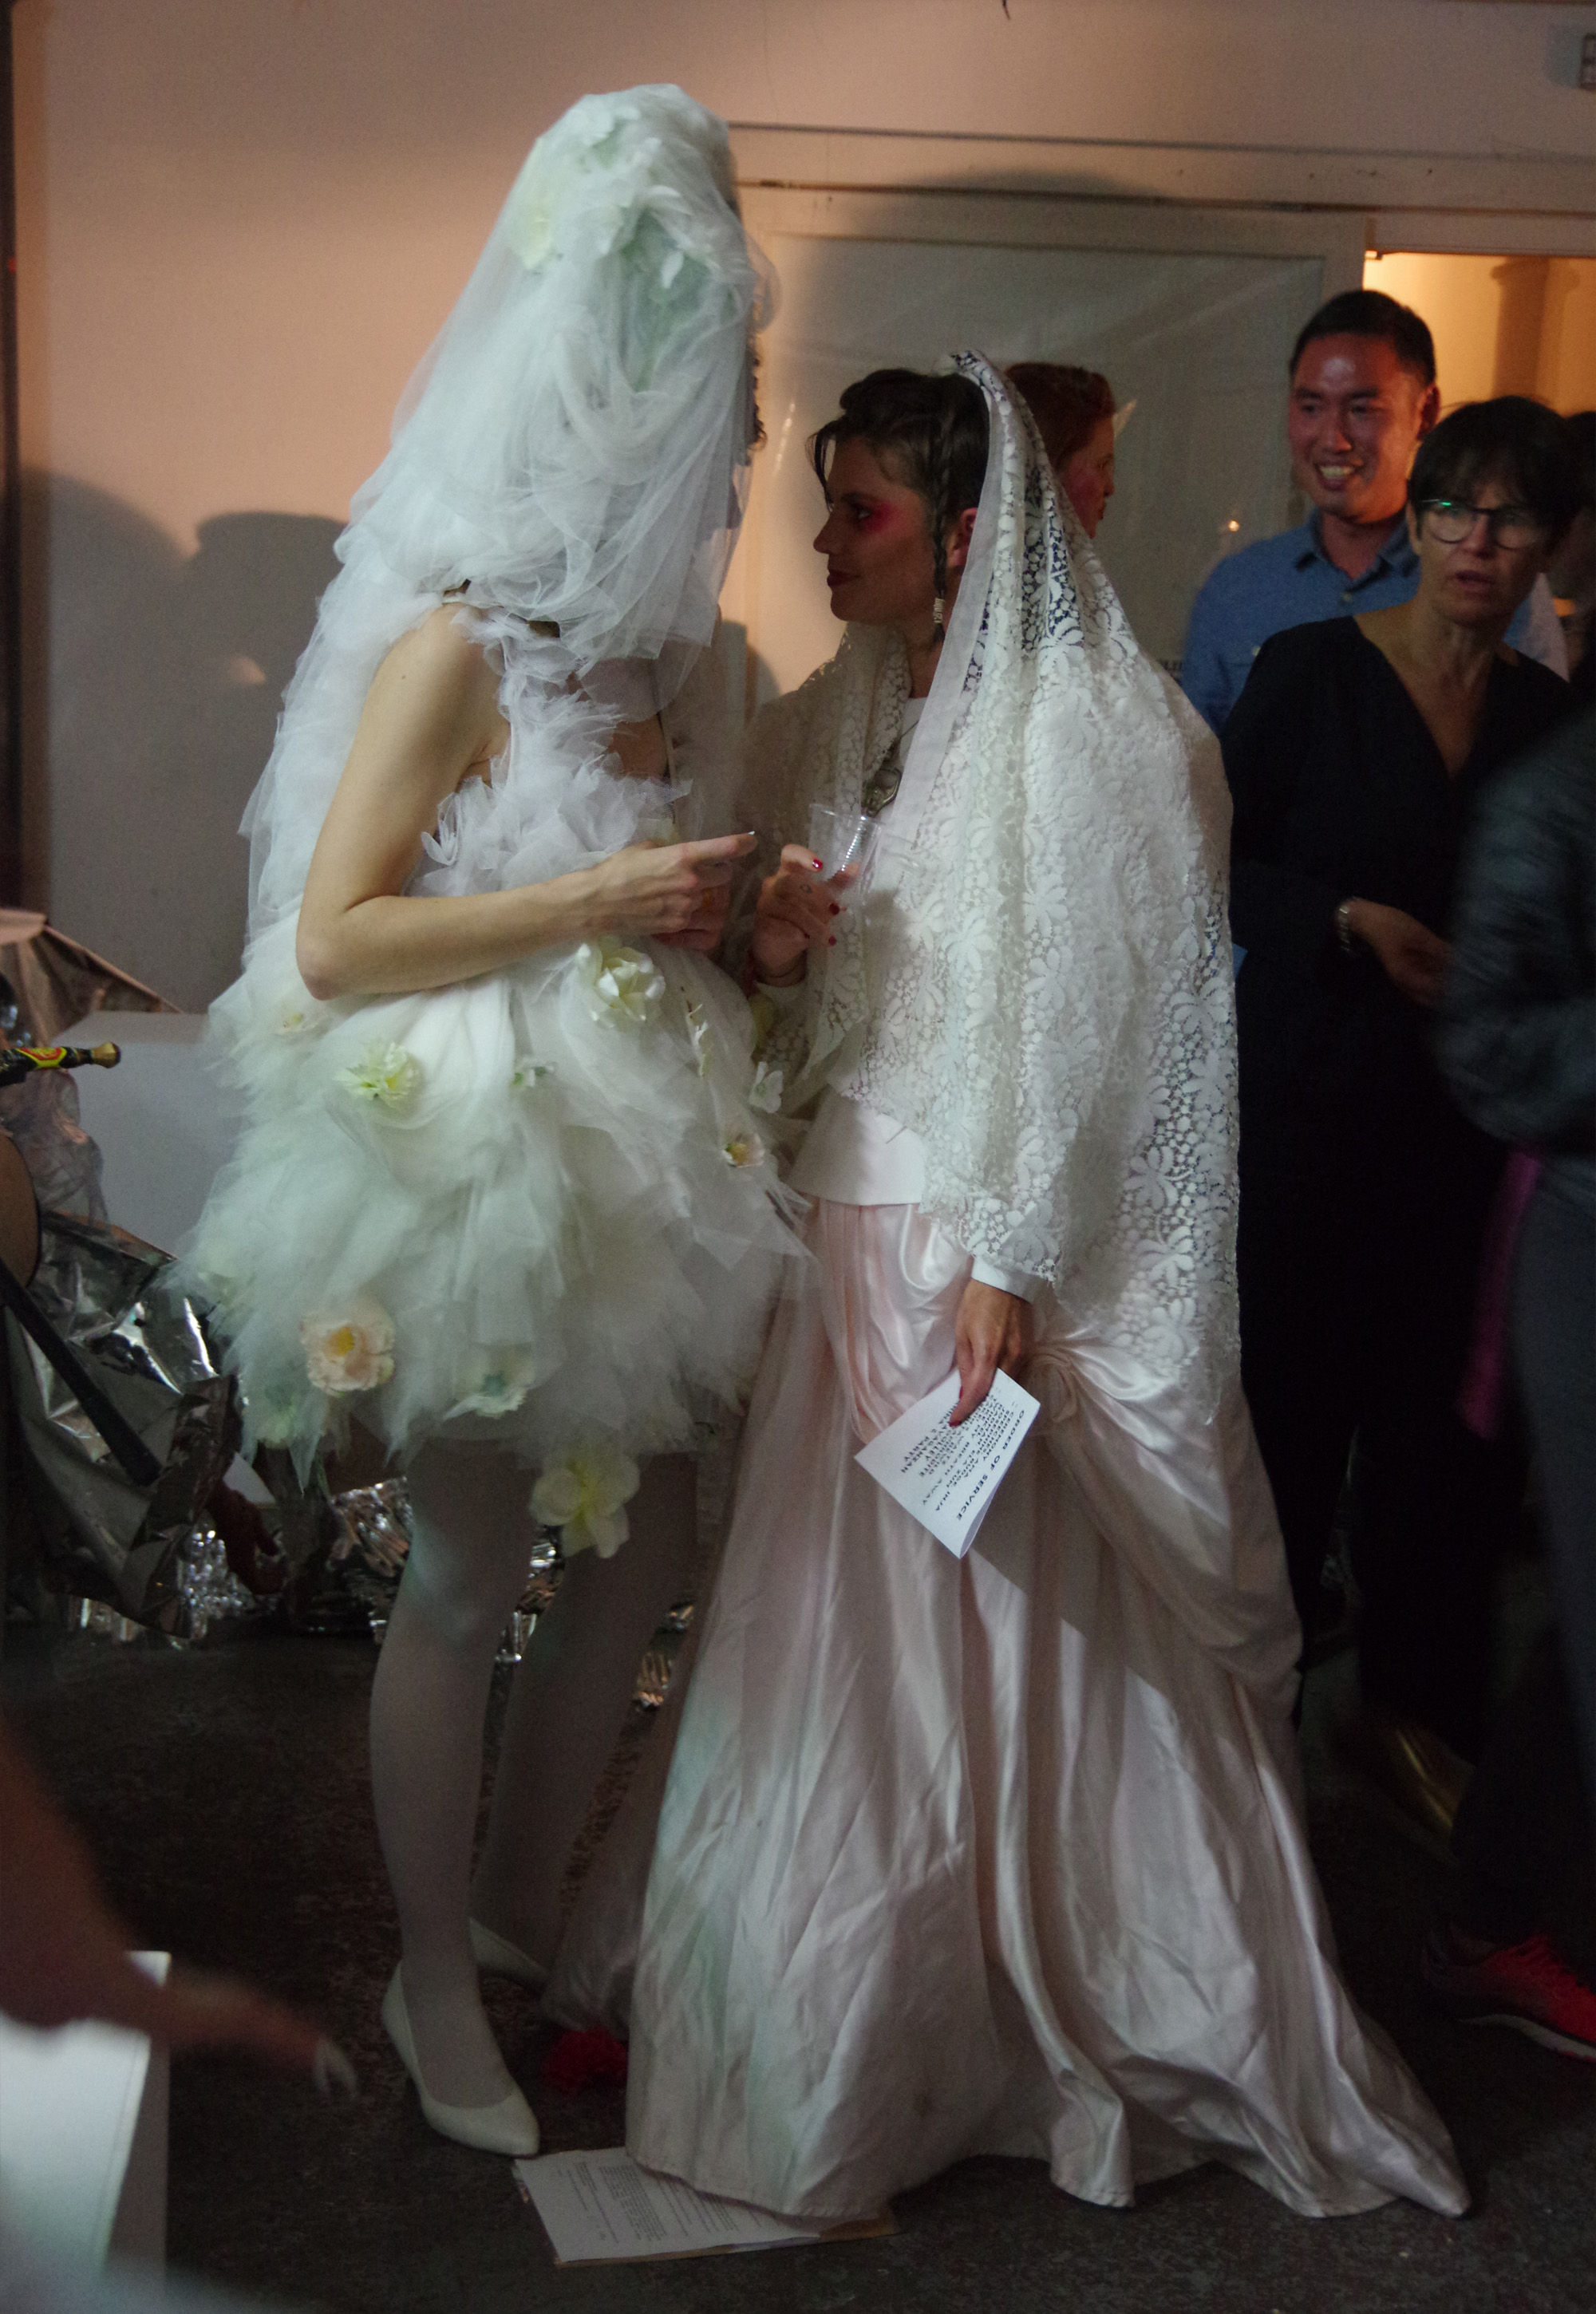 brexit wedding, live art, performance, liviarita, london, subculture, underground, pop, theatre, experimental, contemporary, arts, performance art, crazyiness, youth, art project